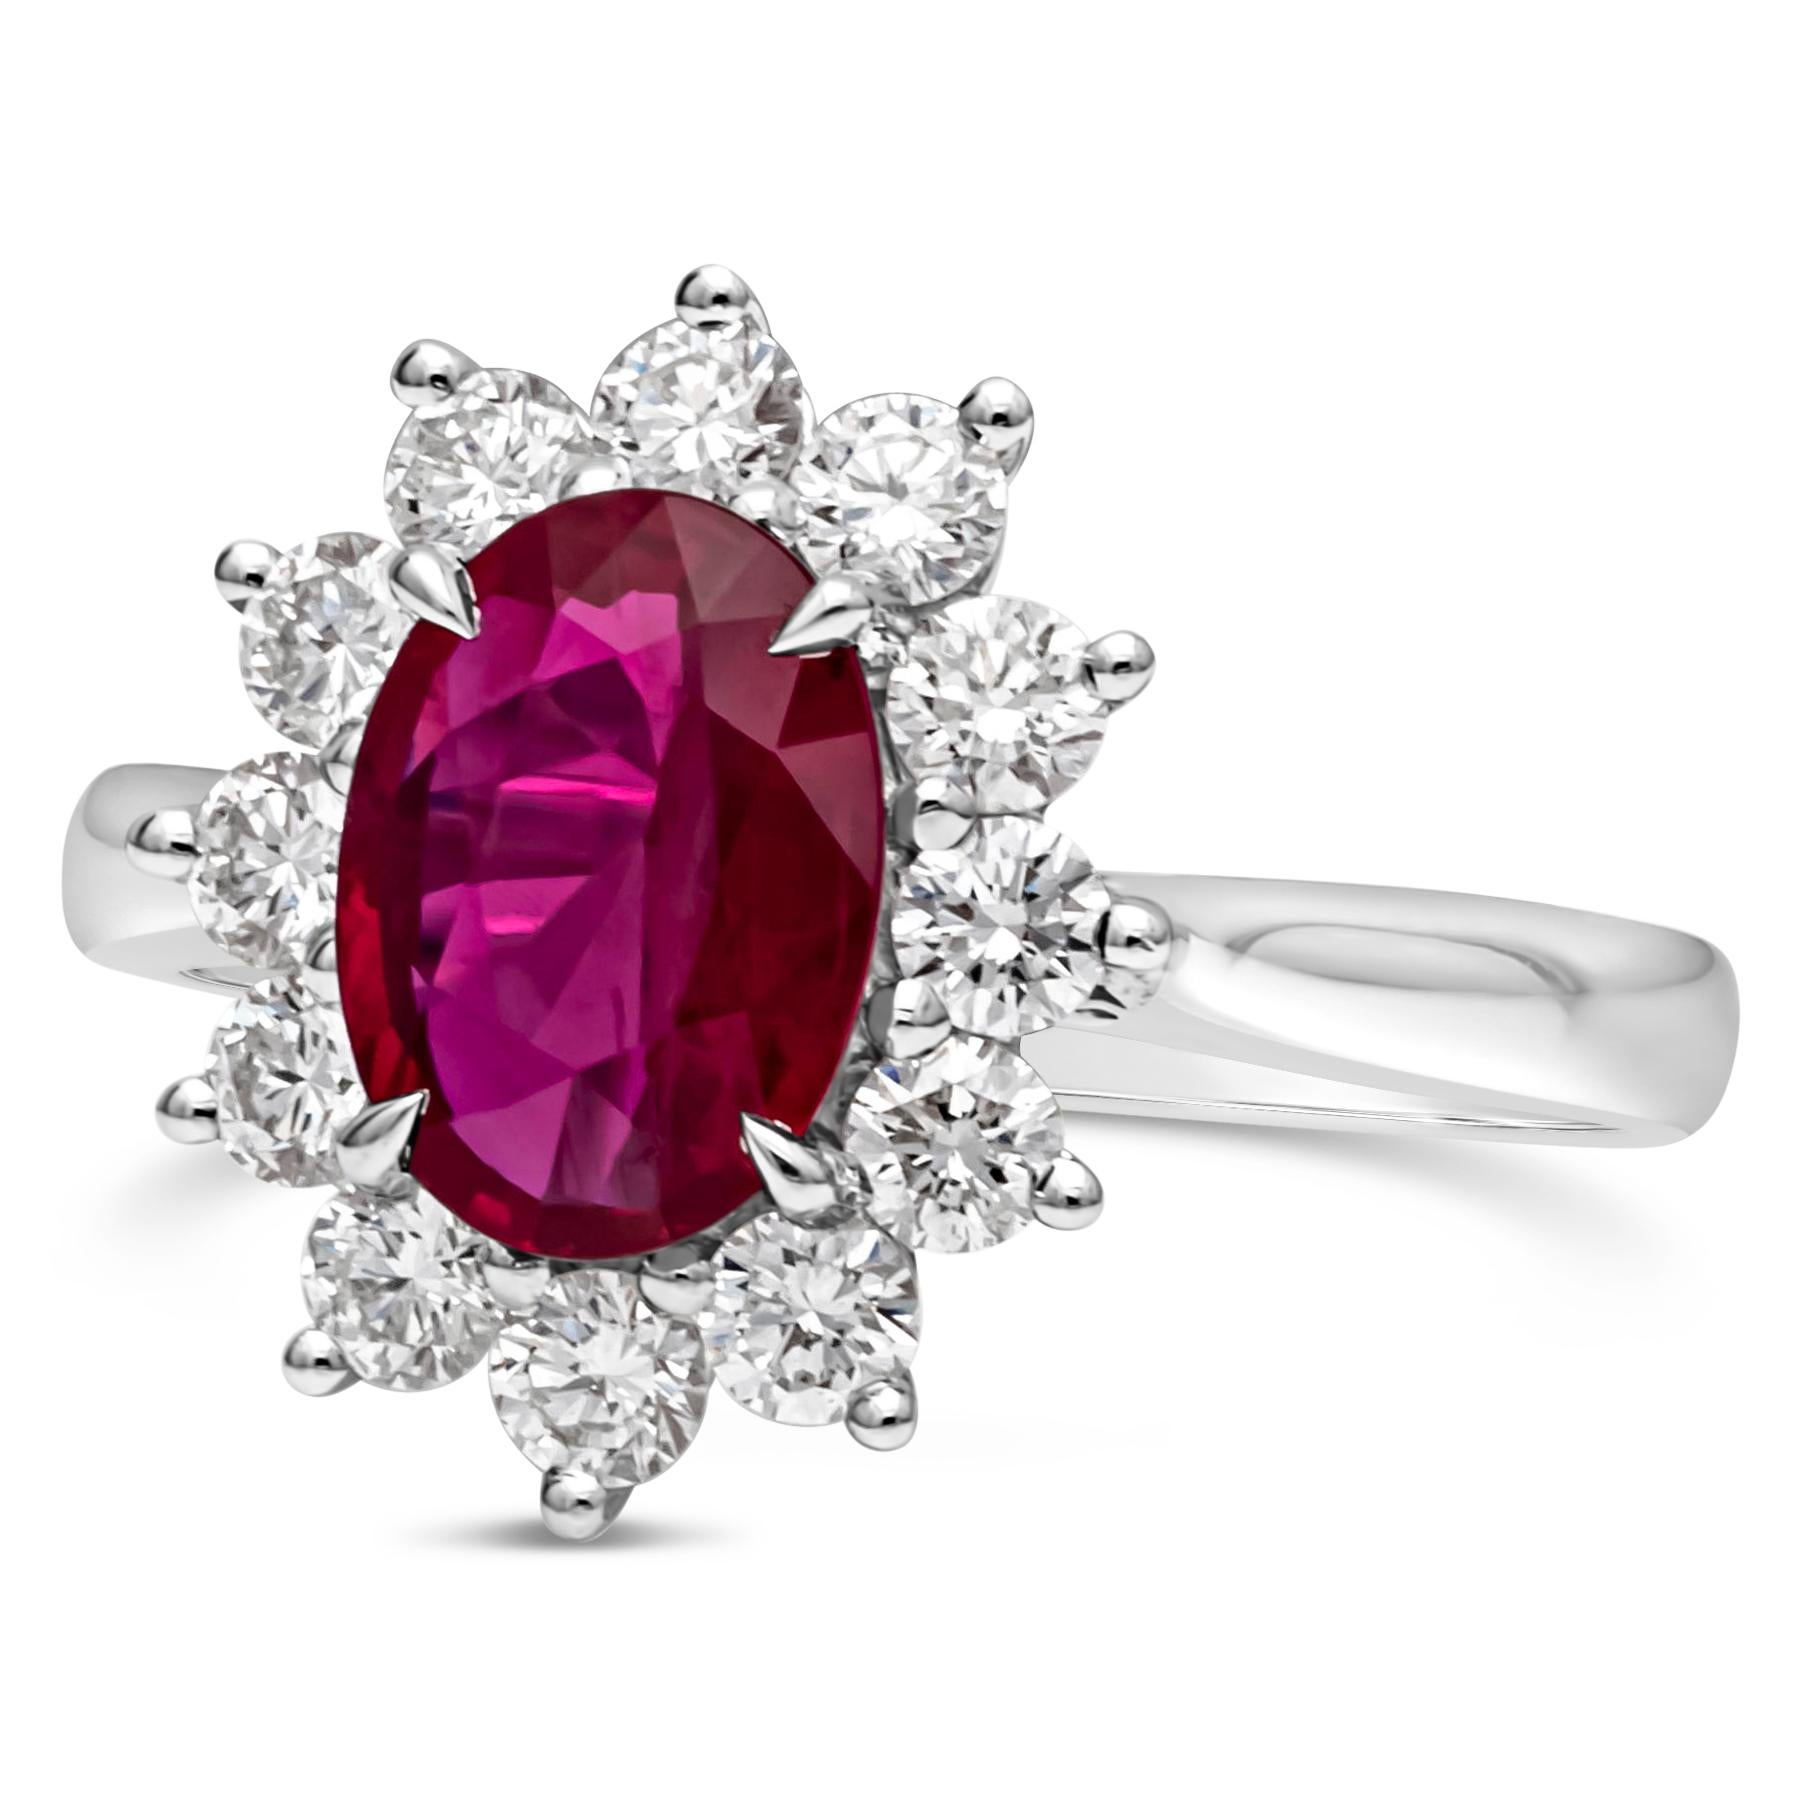 This gorgeous and vibrant 1.50 carats oval cut ruby is complimented by a floral design halo set with 12 sparkling diamonds. Diamonds weigh 0.75 carats total. Made in 18K white gold composition with a comfort fit shank. Size 6.25 US and resizable